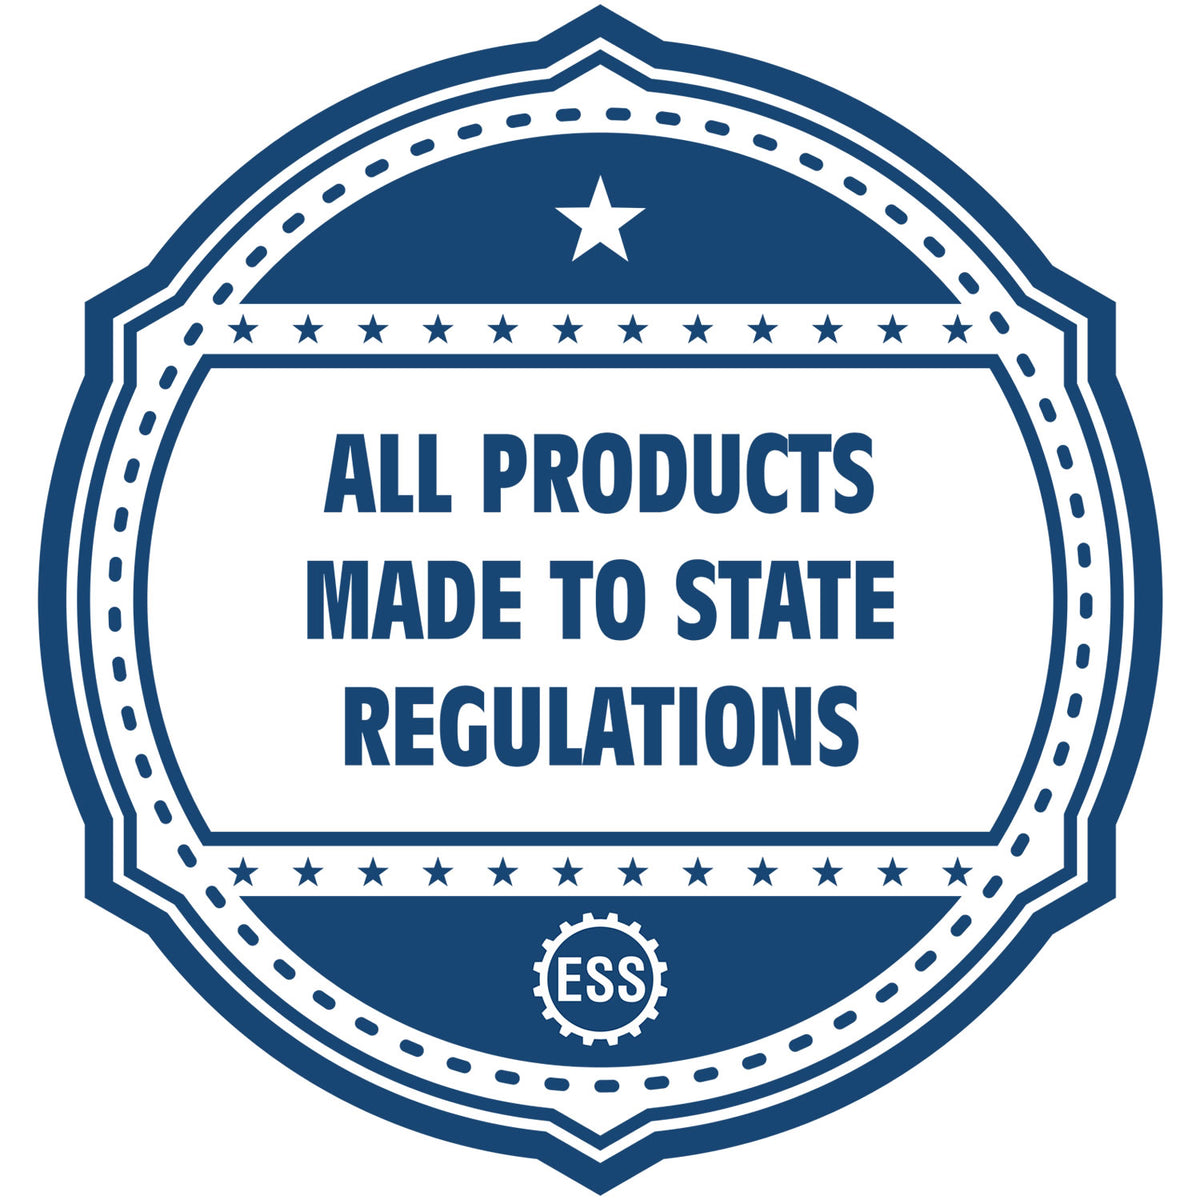 A blue icon or badge for the Heavy Duty Cast Iron Georgia Geologist Seal Embosser showing that this product is made in compliance with state regulations.